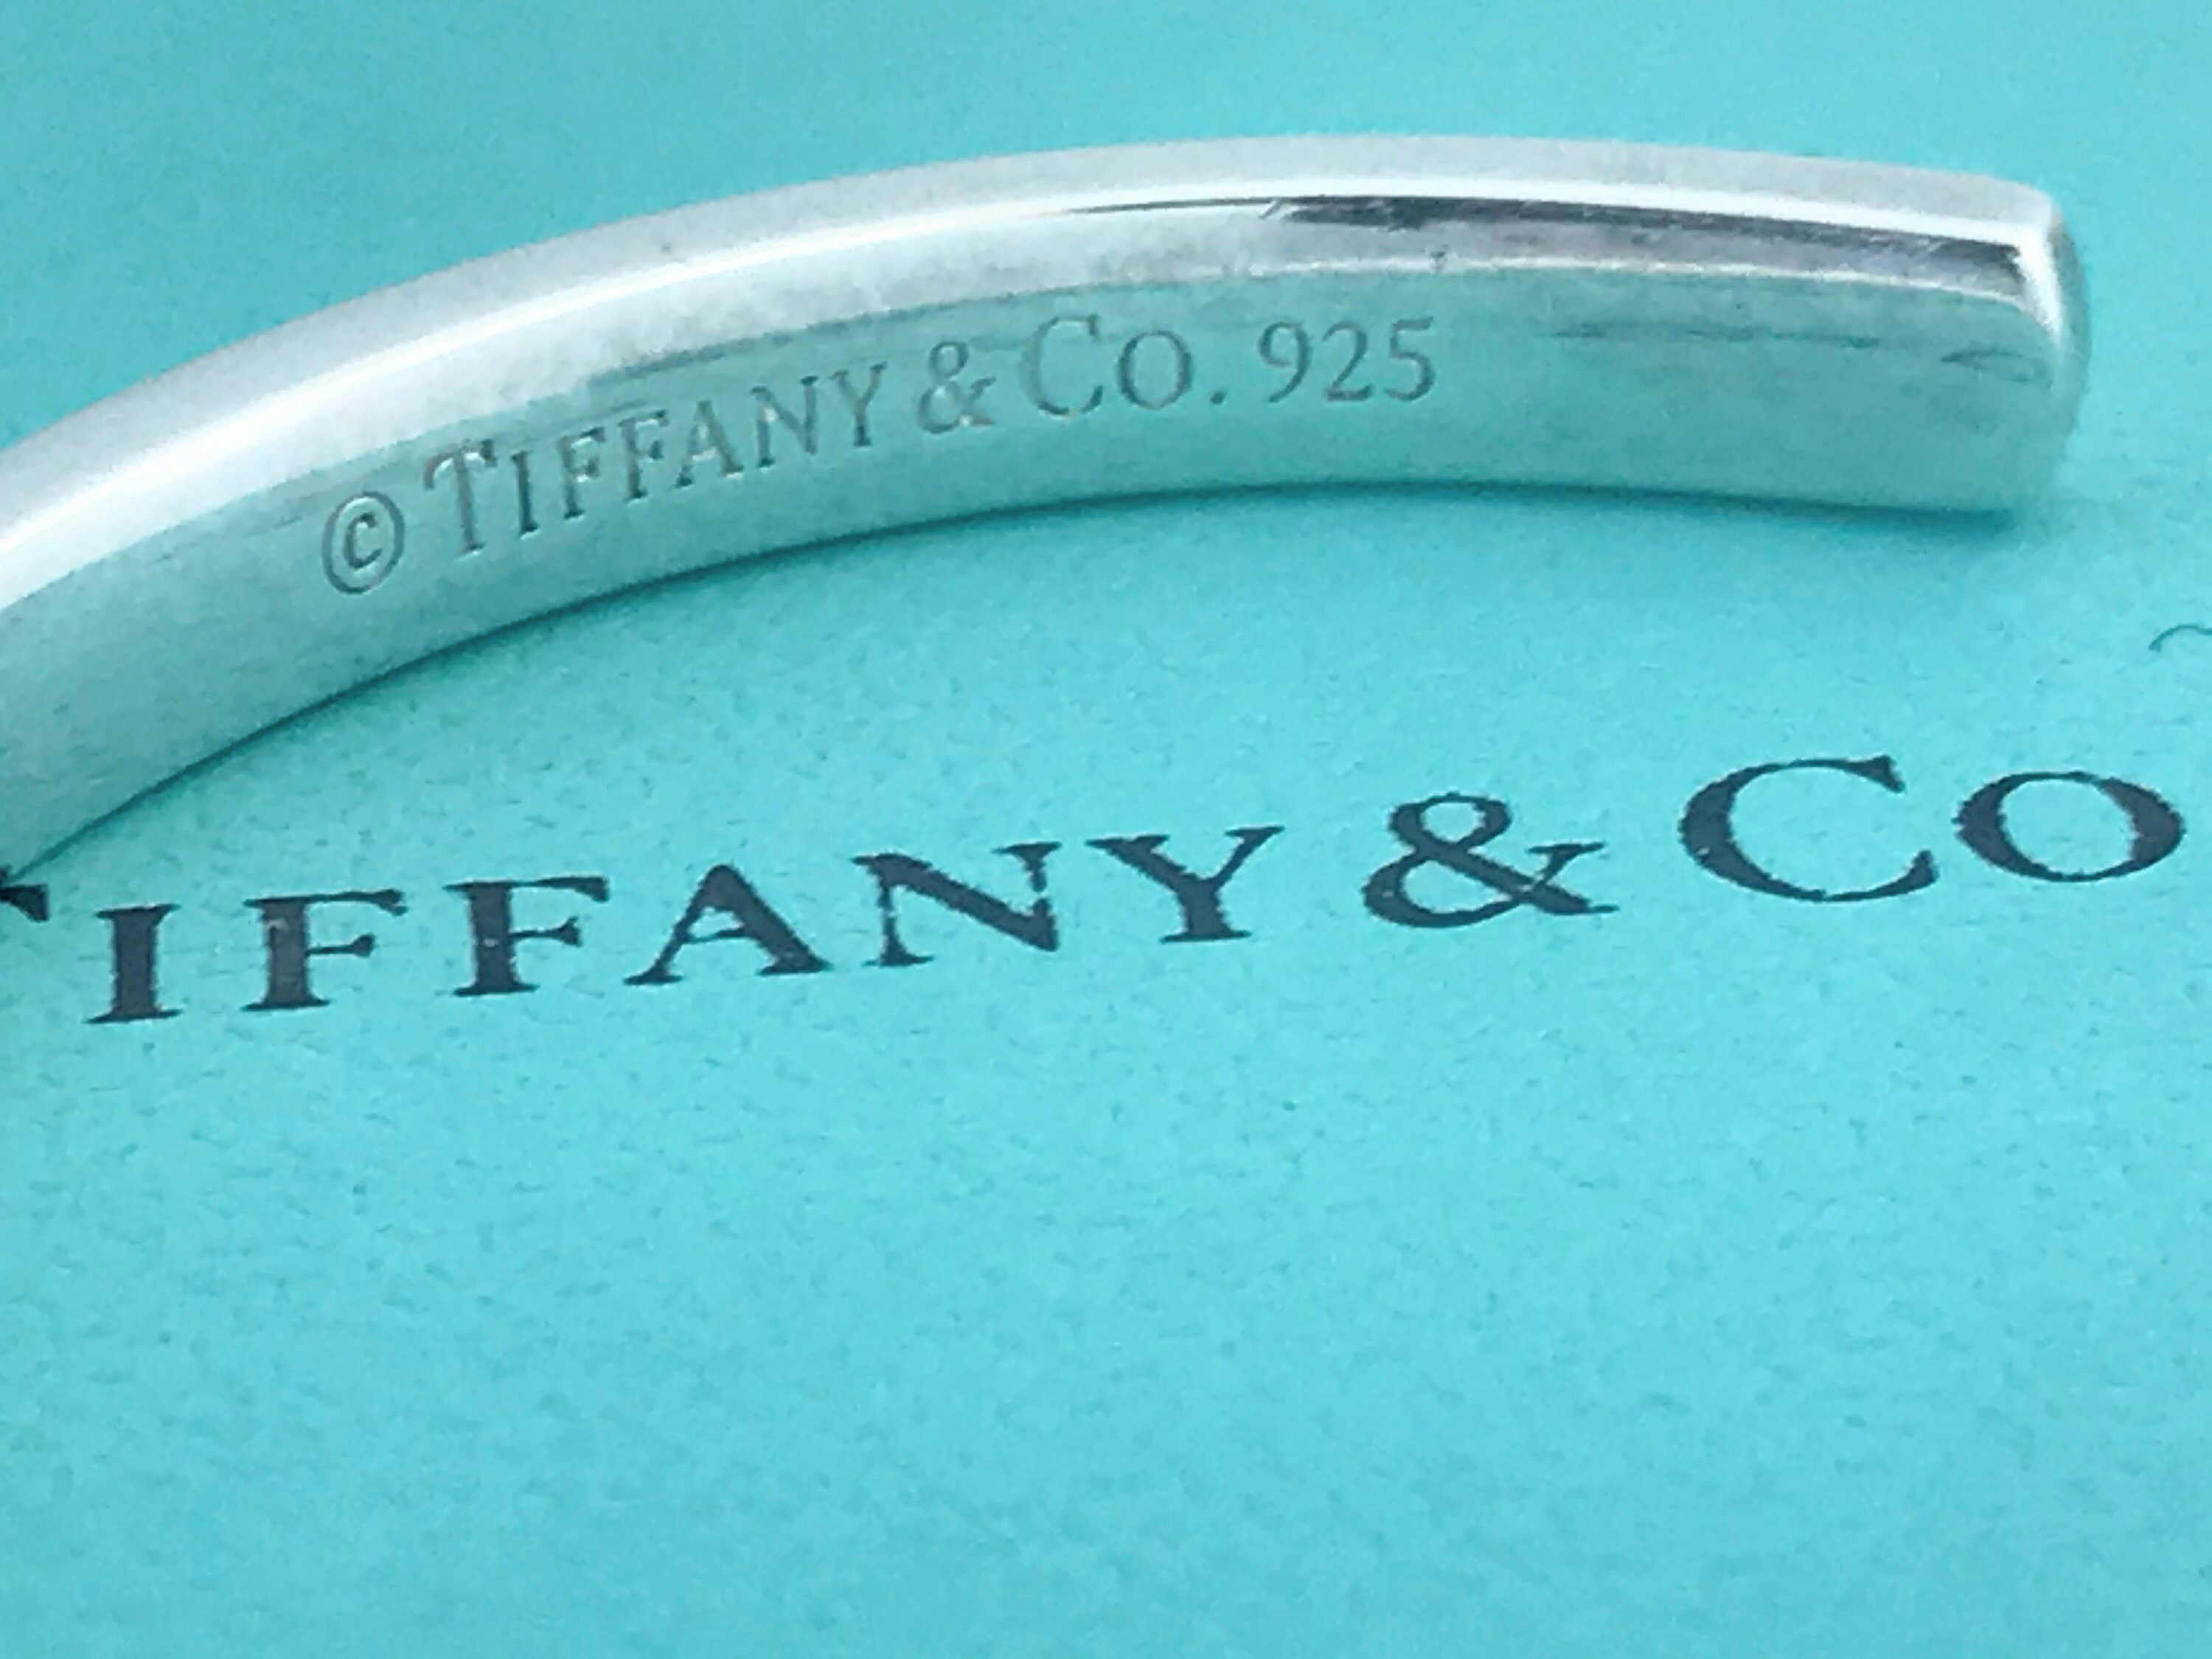 Authentic Tiffany Co. 1837 Sterling Silver 925 Cuff Bracelet -  Israel